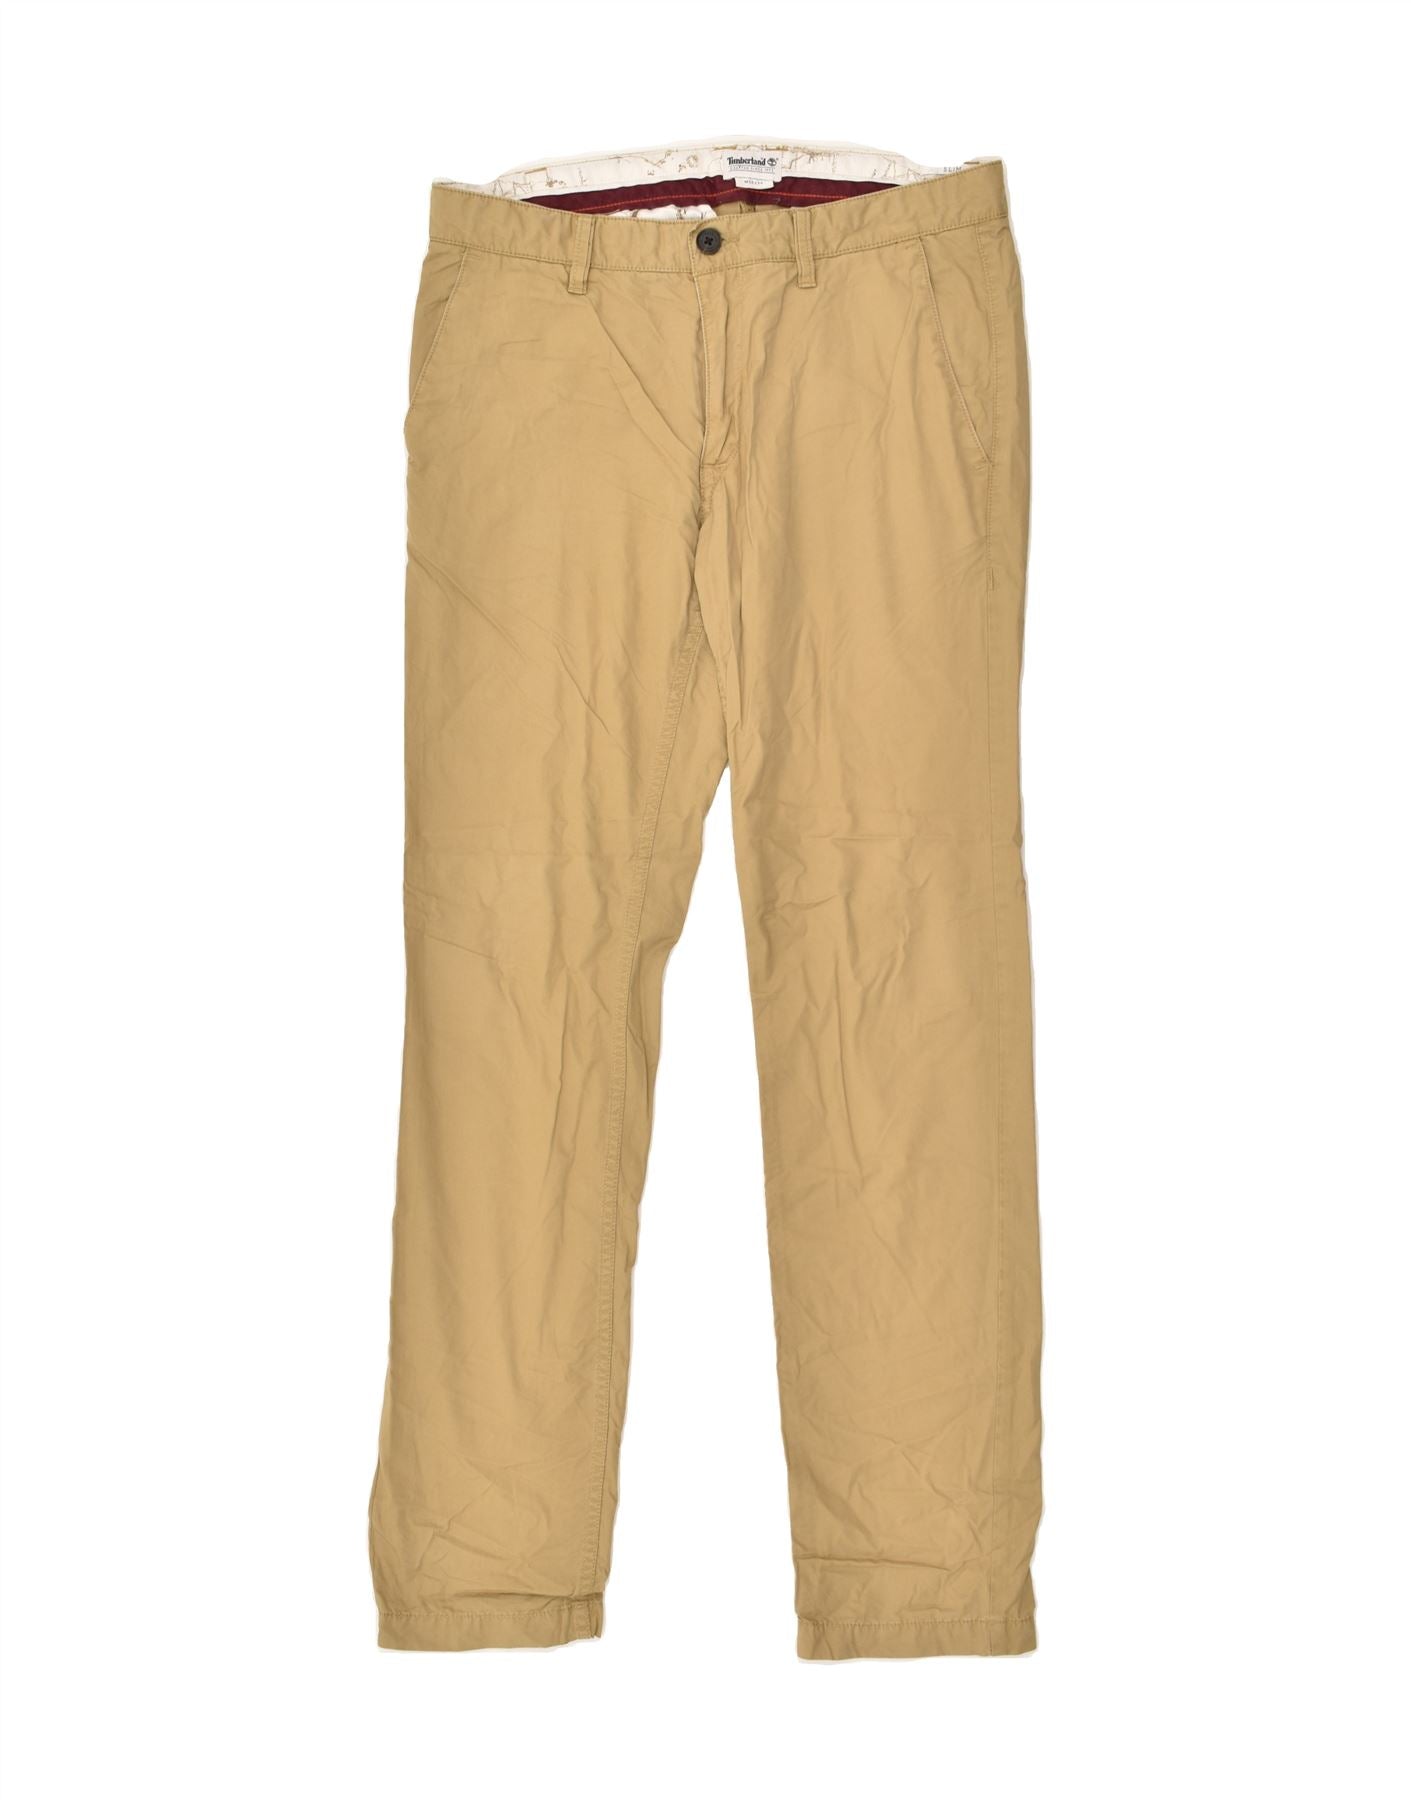 Timberland Slim Fit Trousers for Men - Olive price in Kuwait | Souq Kuwait  | kanbkam